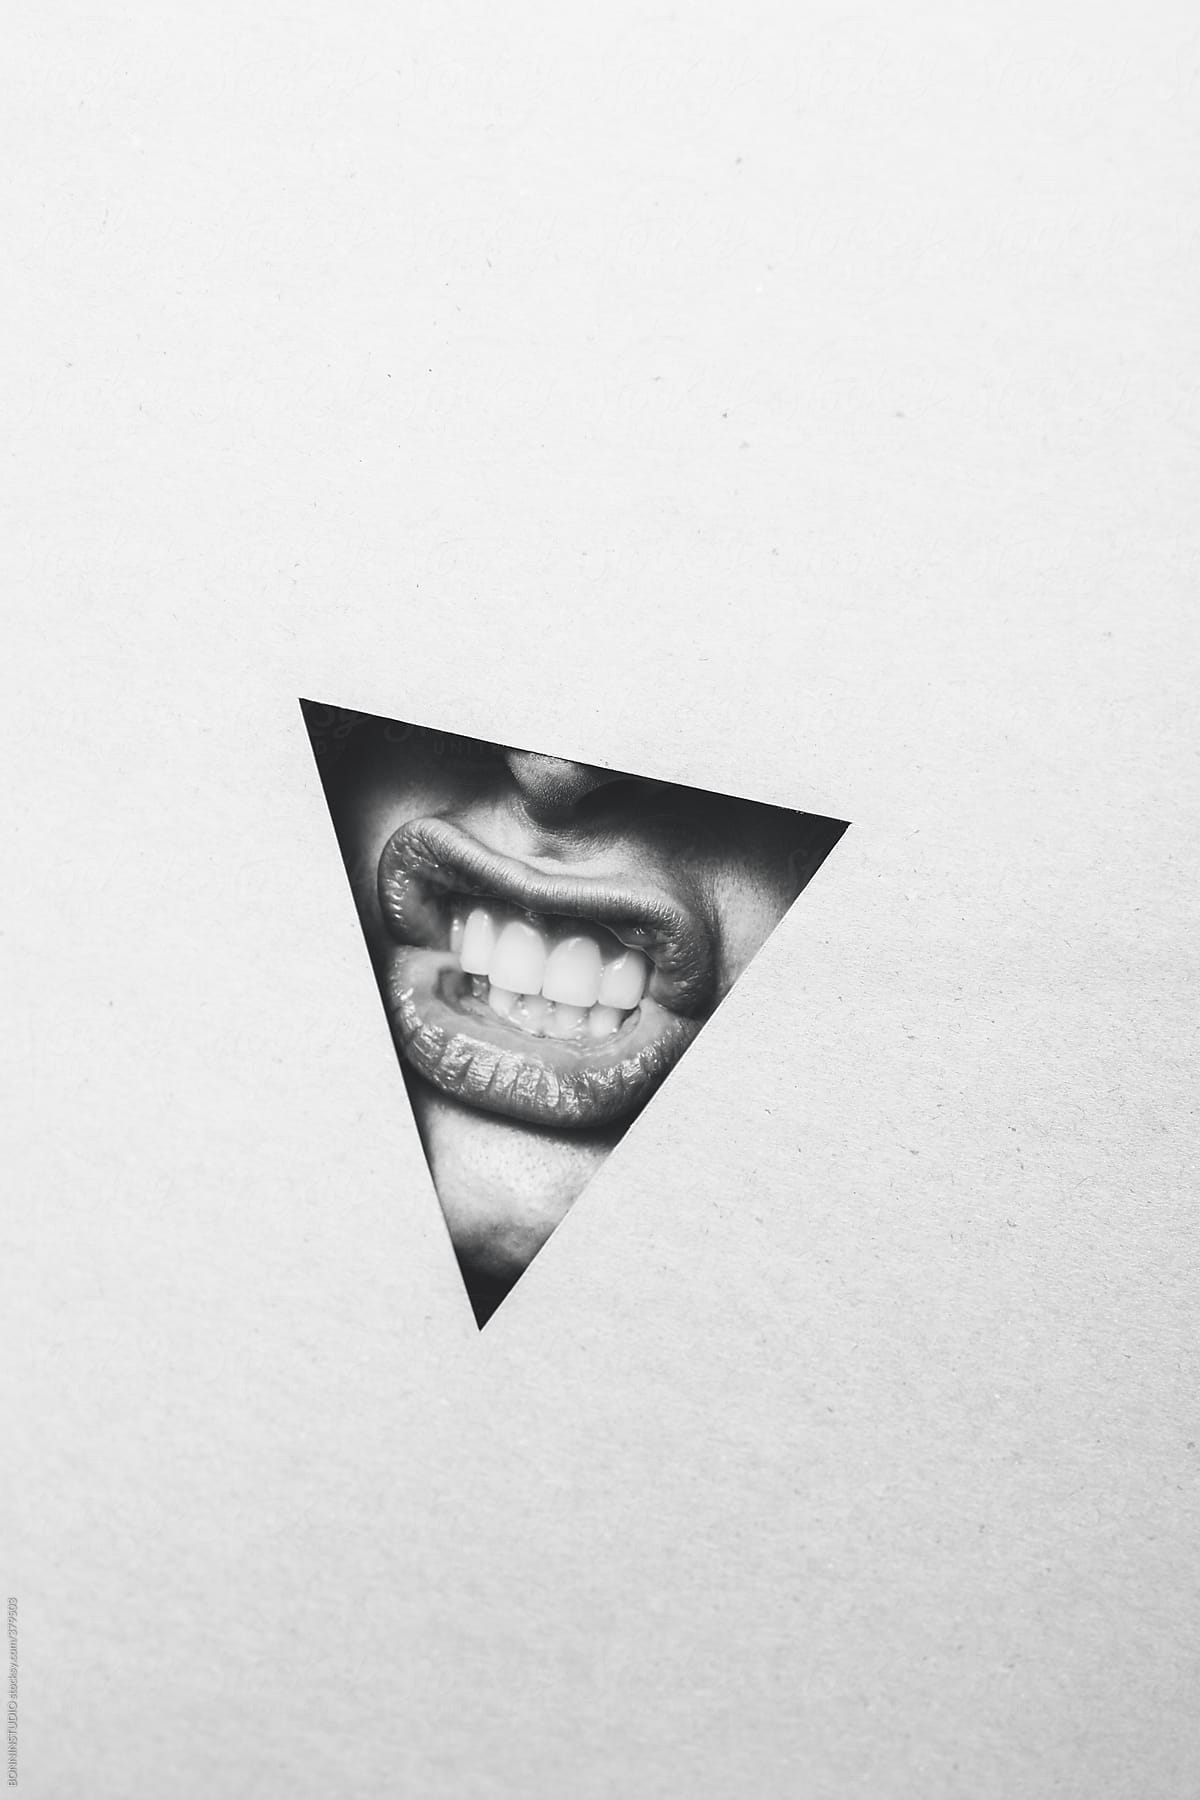 Mouth and teeth. Body part in a triangle.